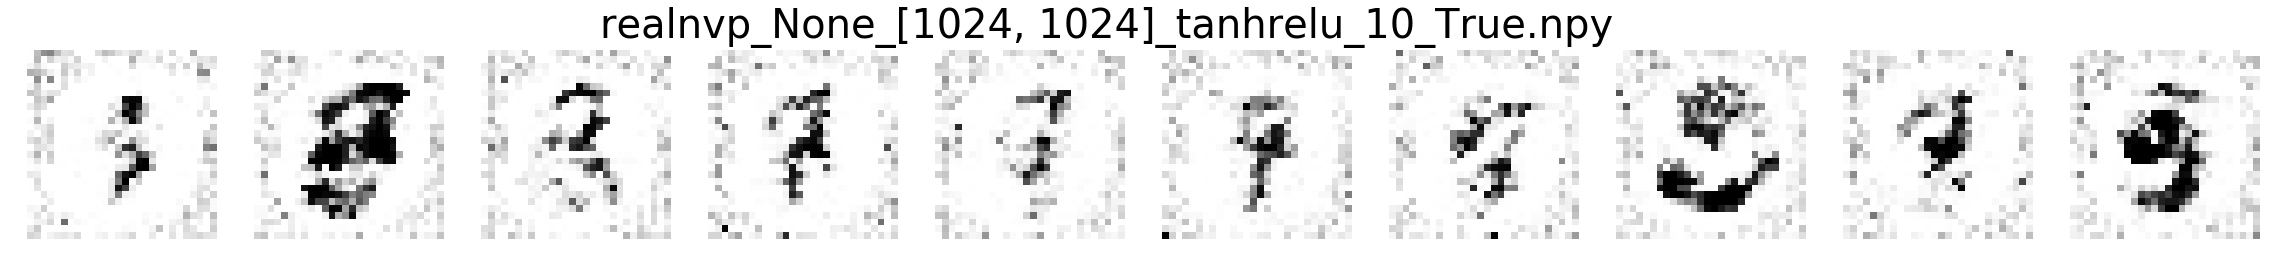 ../../_images/generated_notebooks_demo_mnist_deep_copula_13_2.png